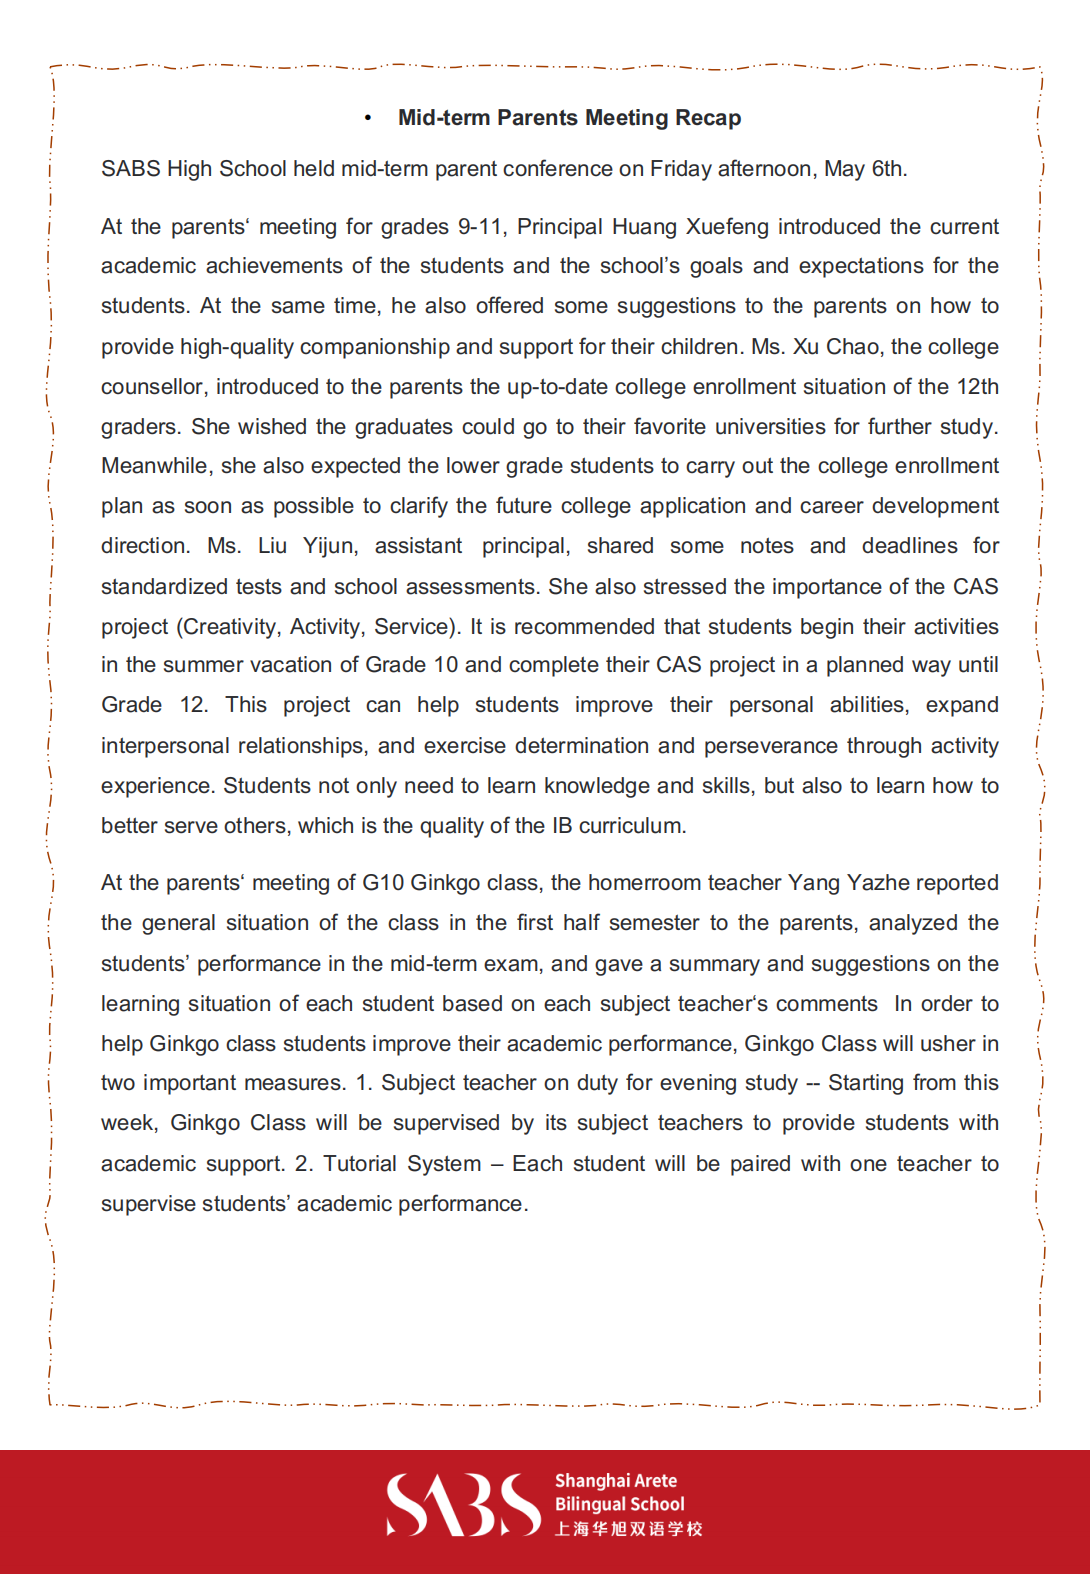 HS 6th Issue Newsletter pptx（English)_06.png